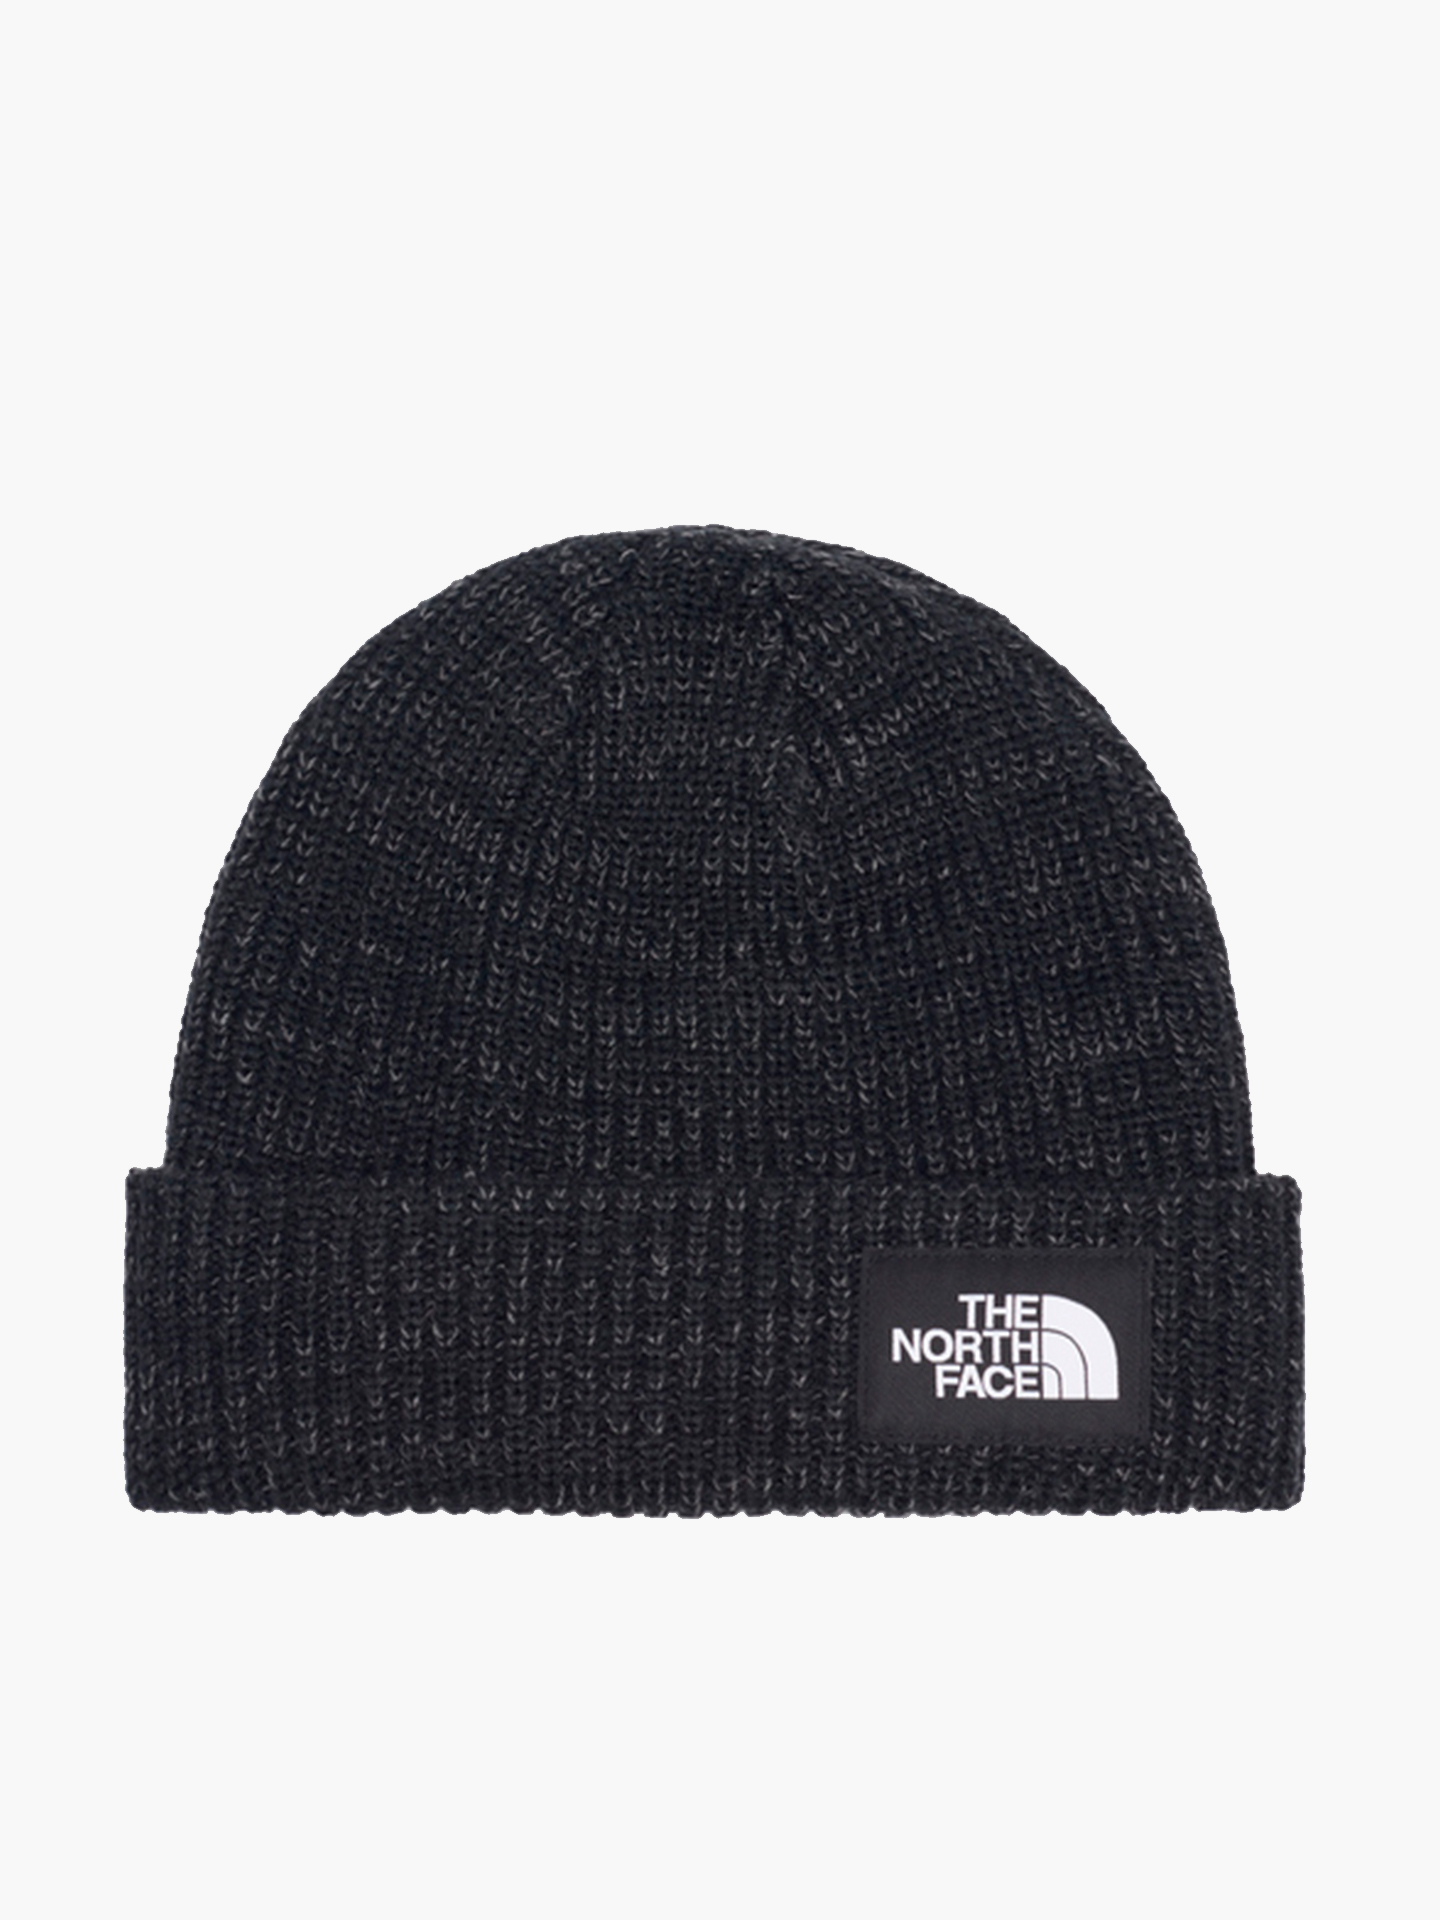 T93FJWJK3 Шапка The North Face Salty Dog Beanie Black, OS T93FJWJK3 - фото 1